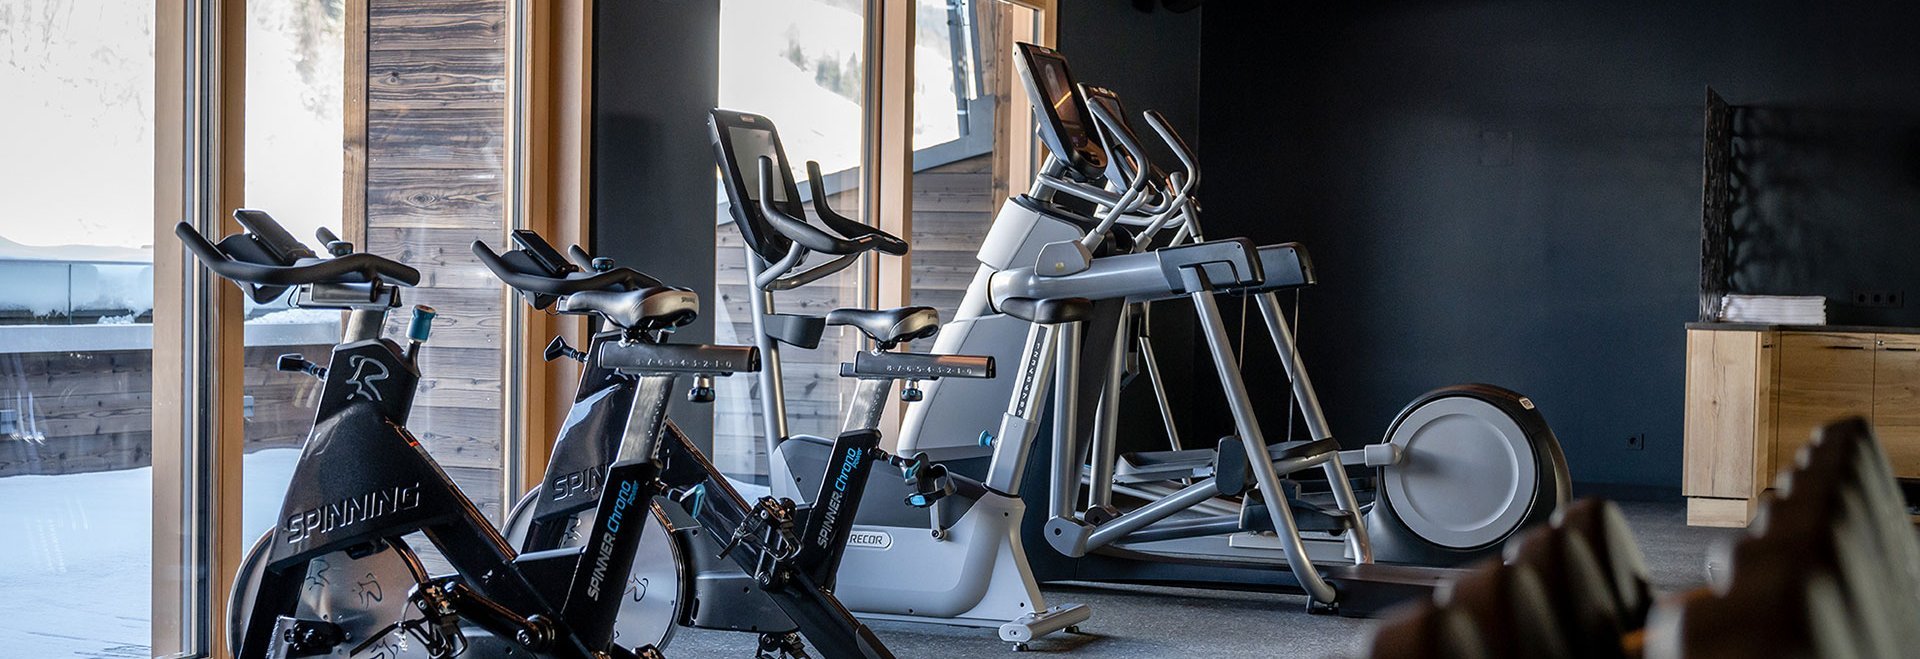 Cardio machines in the fitness lounge